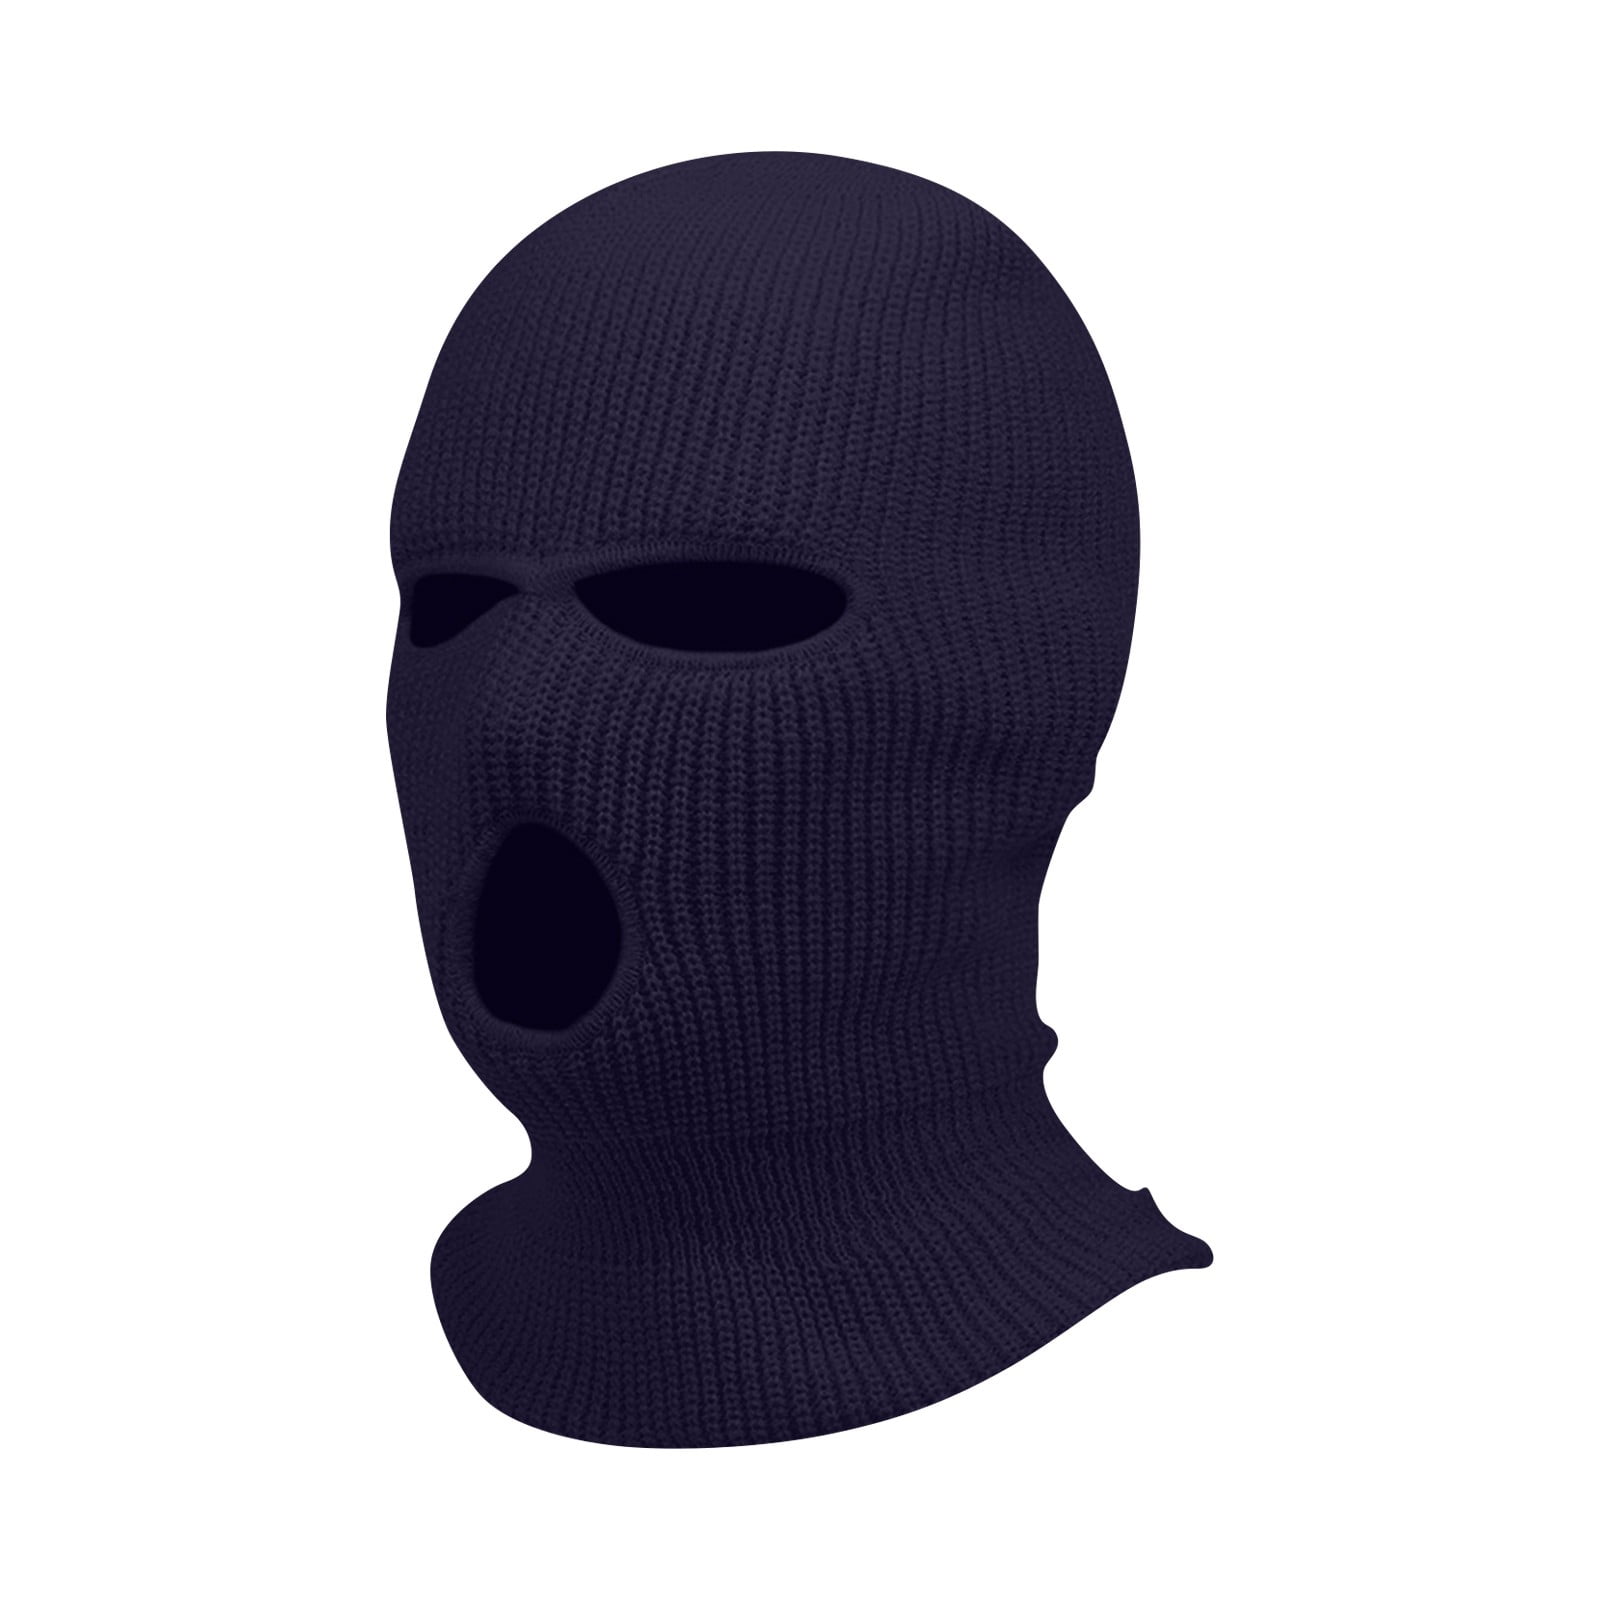 UoCefik 3 Hole Winter Knitted Mask Face Cover Ski Outdoor Mask ...